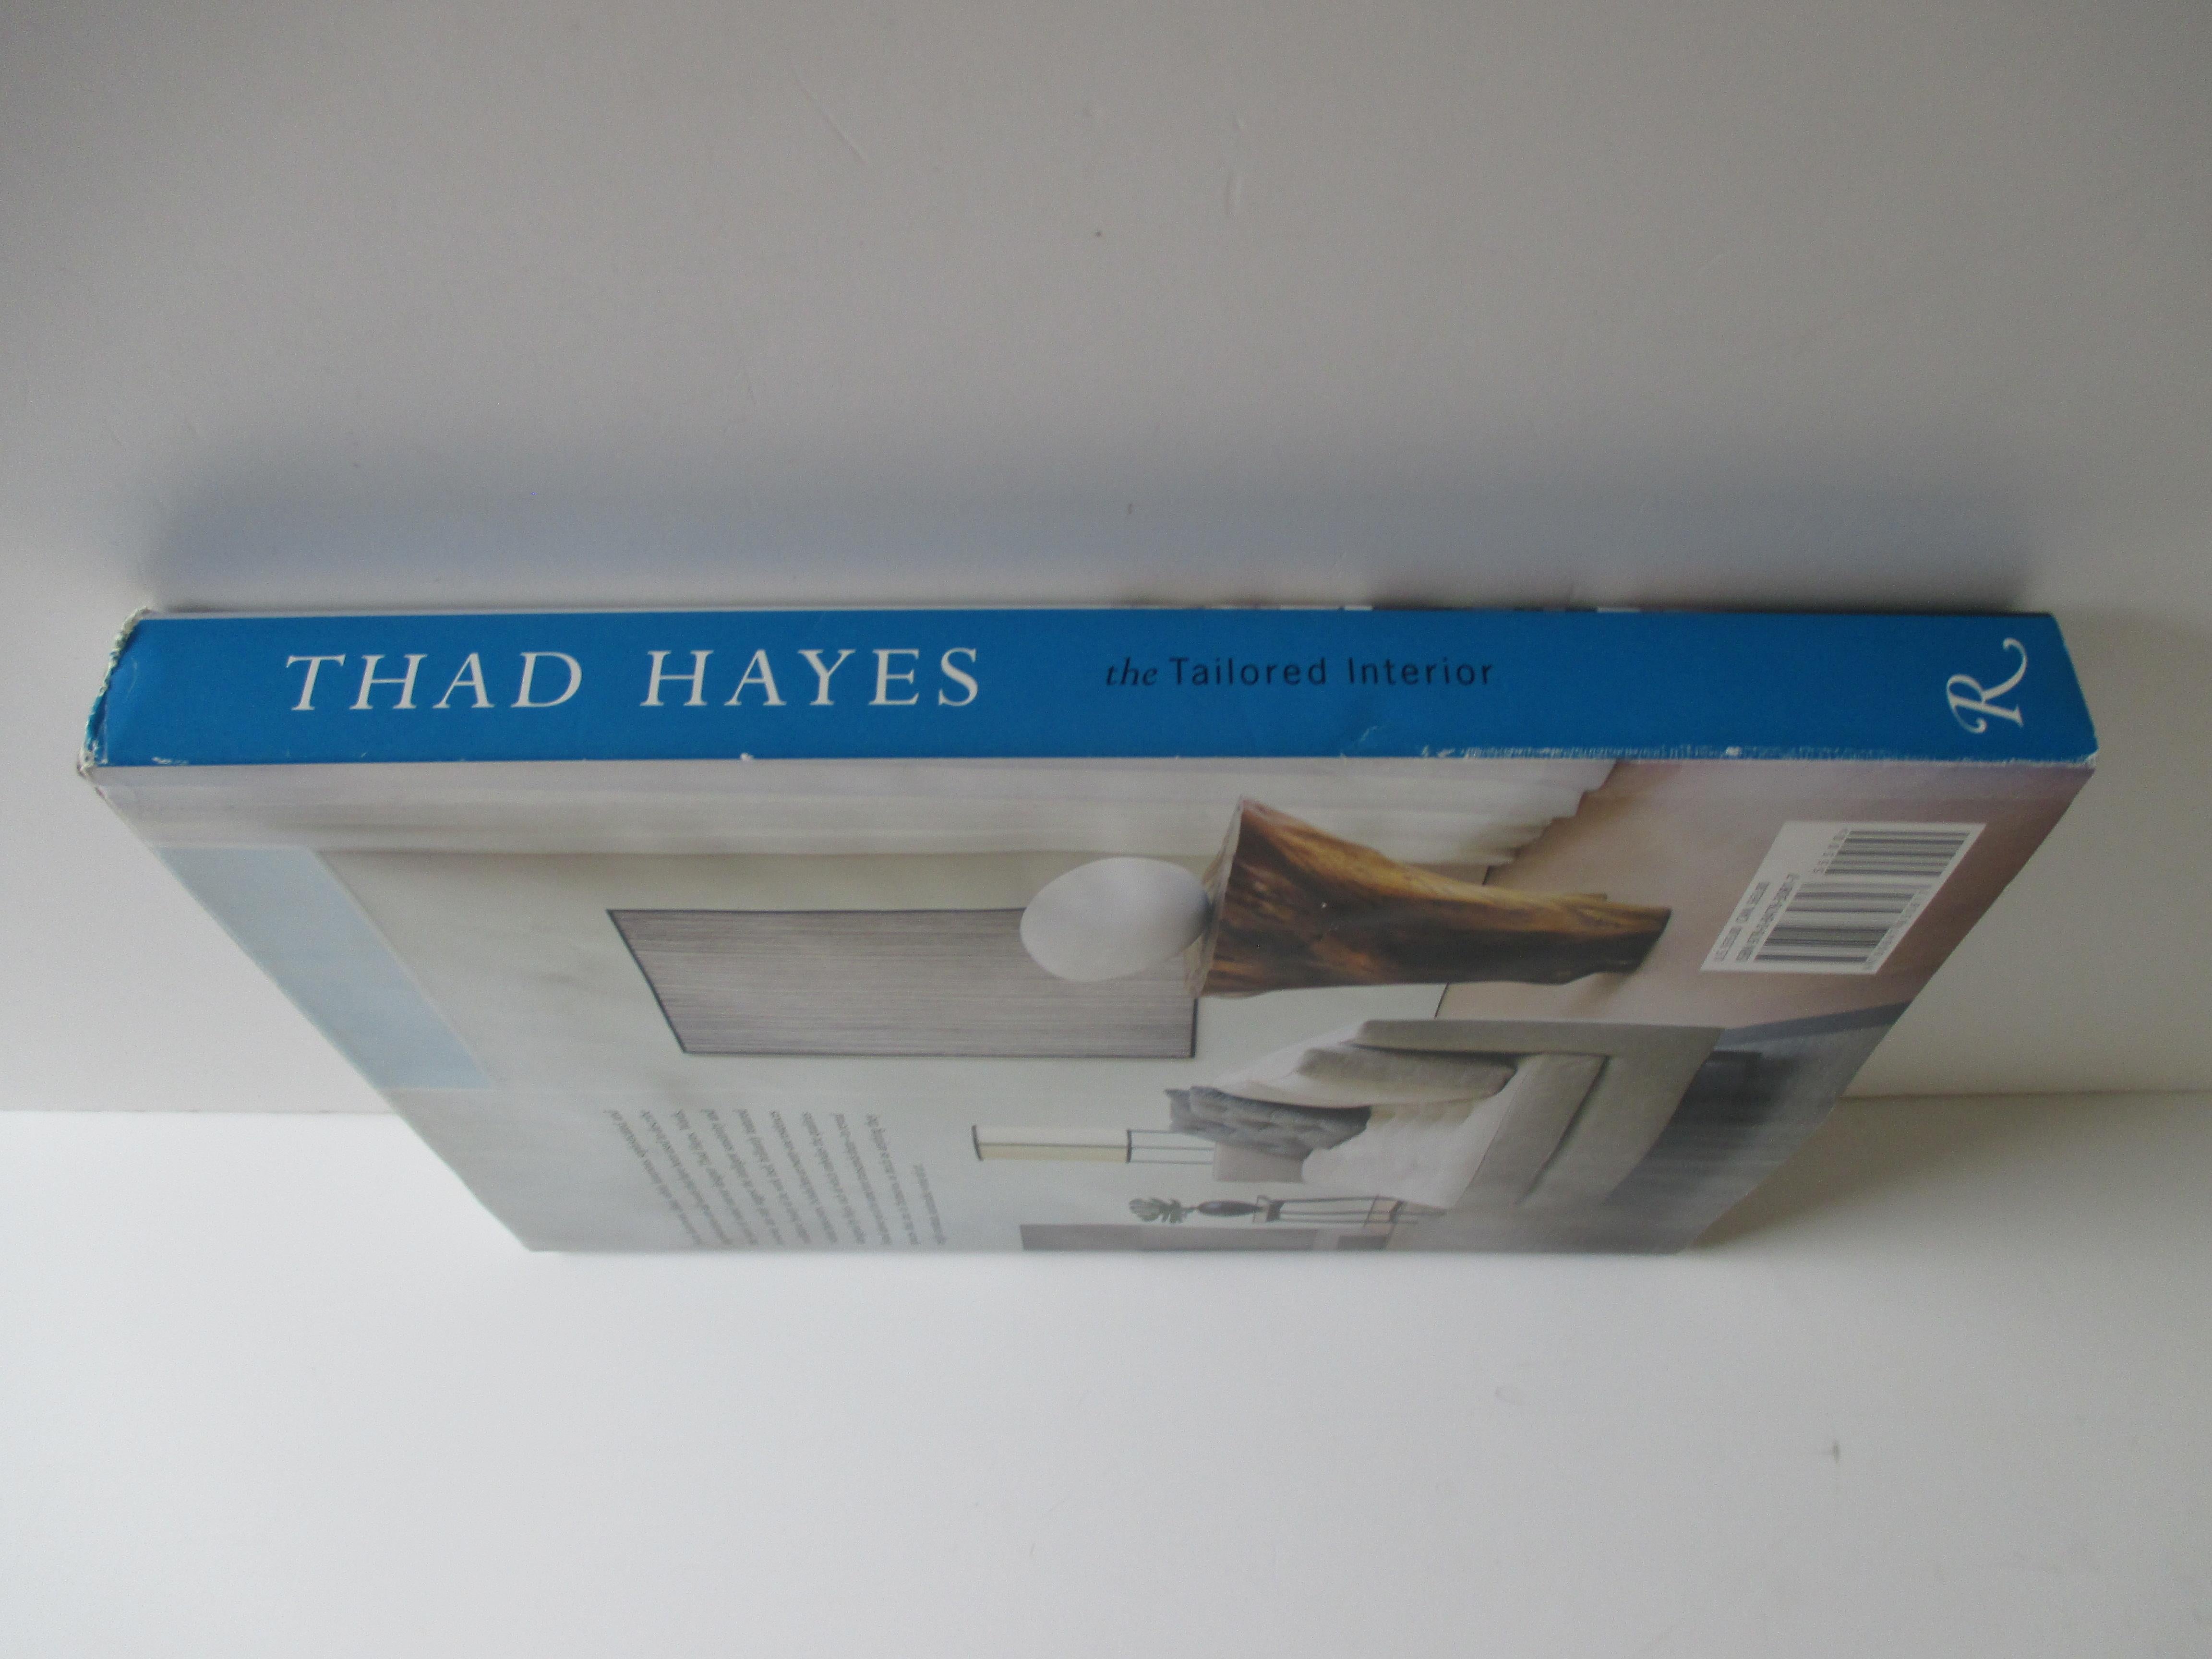 Machine-Made Thad Hayes Hard Cover Book